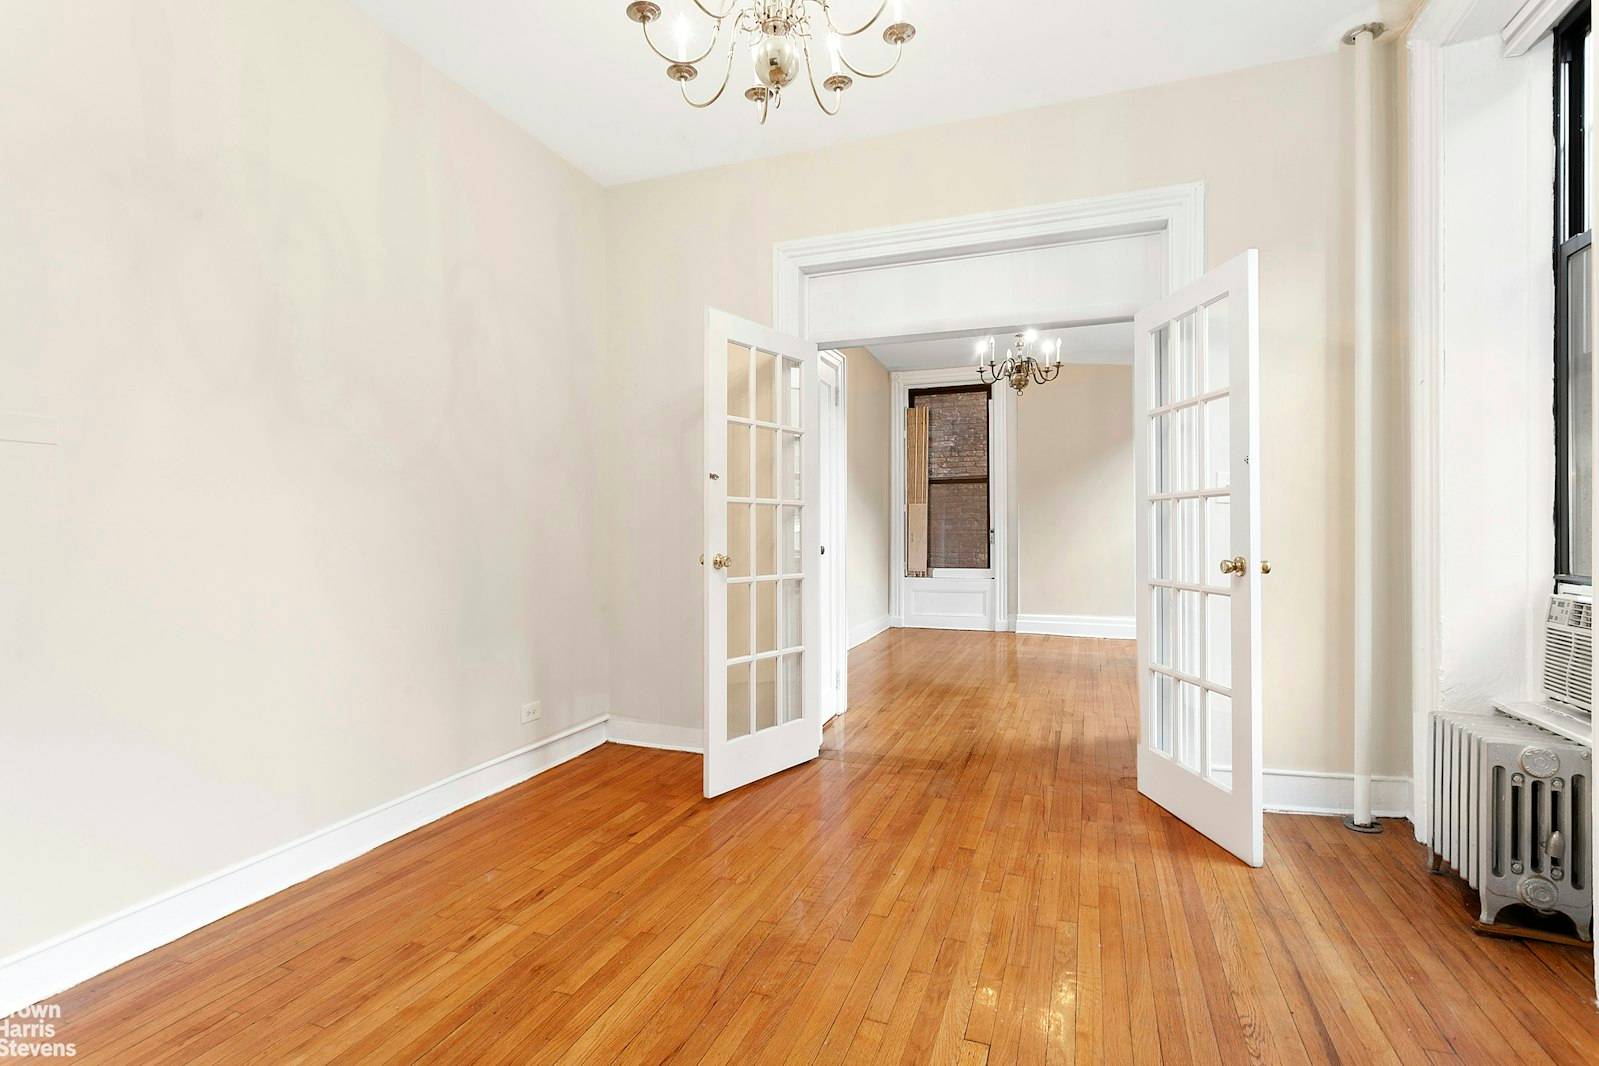 This charming prewar one bedroom, one bathroom apartment boasts elegant 10 foot high ceilings, classic French doors, original moldings, and exquisite vintage chandeliers, adding character and sophistication to the space.